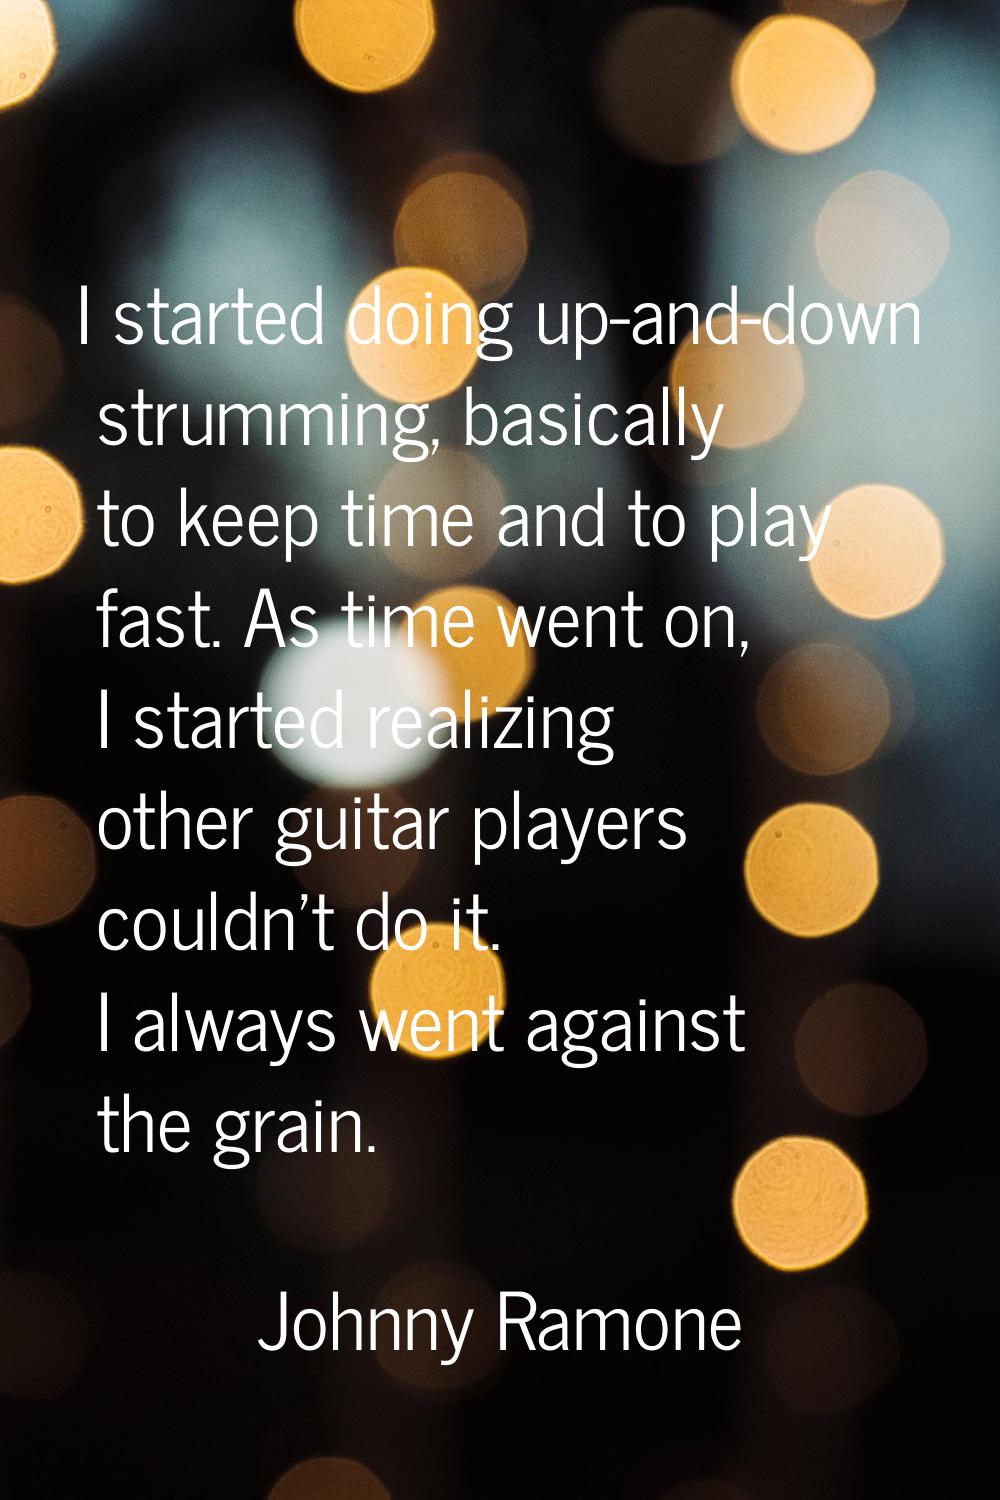 I started doing up-and-down strumming, basically to keep time and to play fast. As time went on, I 